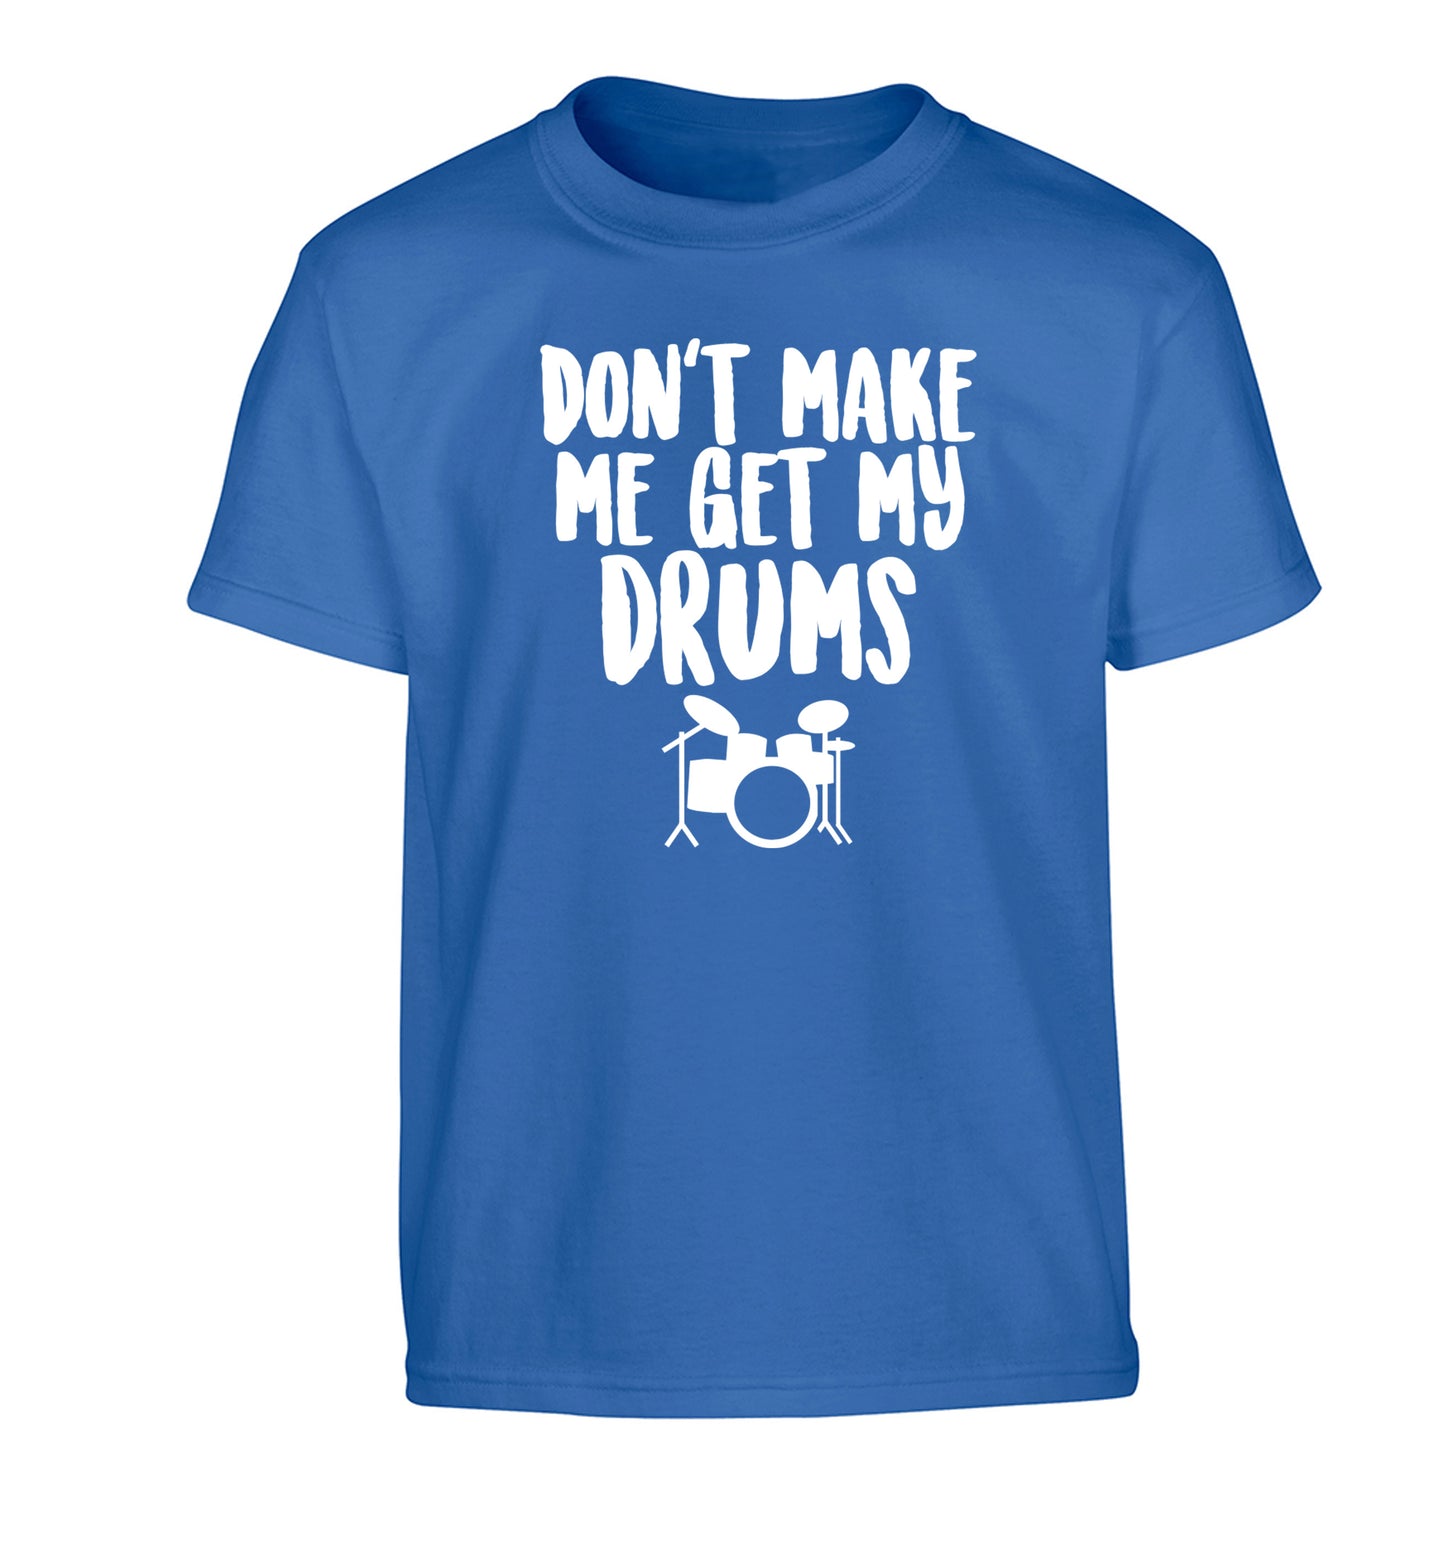 Don't make me get my drums Children's blue Tshirt 12-14 Years